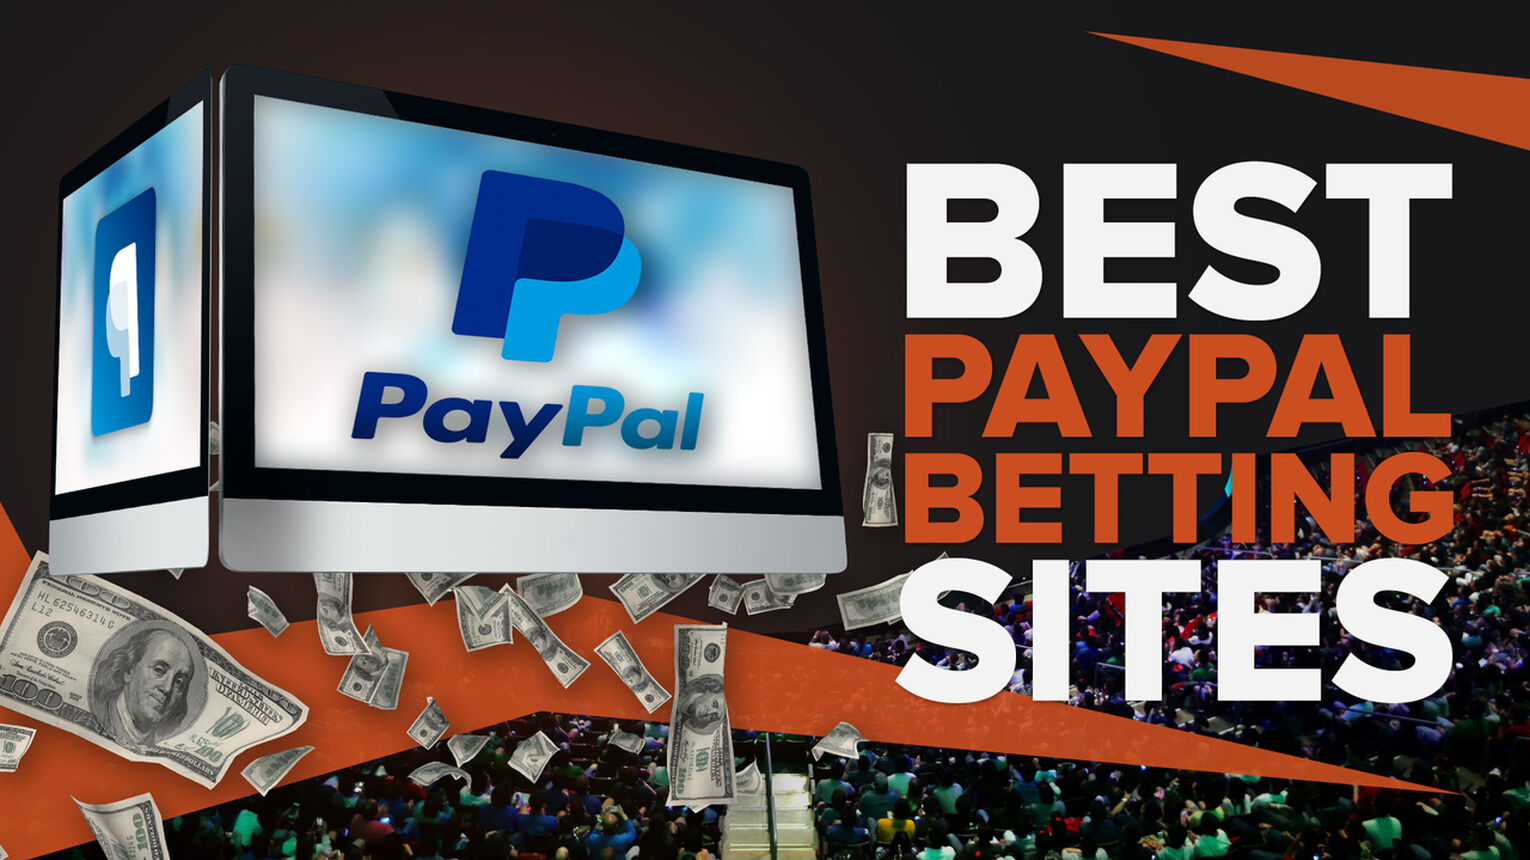 Best Esports Betting sites with PayPal